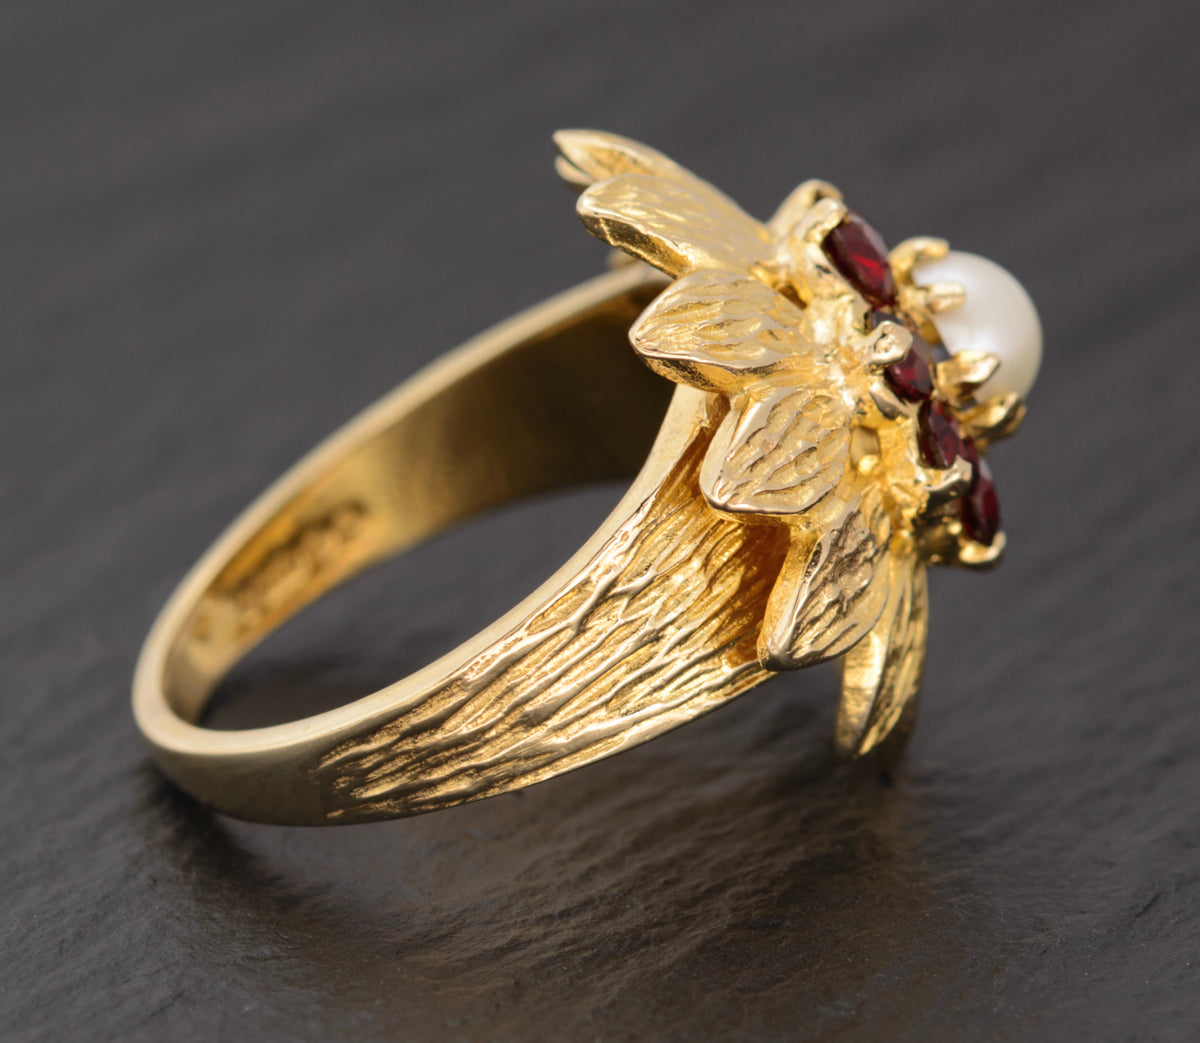 Vintage 9ct Gold Cocktail Ring 1970's Retro With Garnet & Cultured Pearl (A1536)